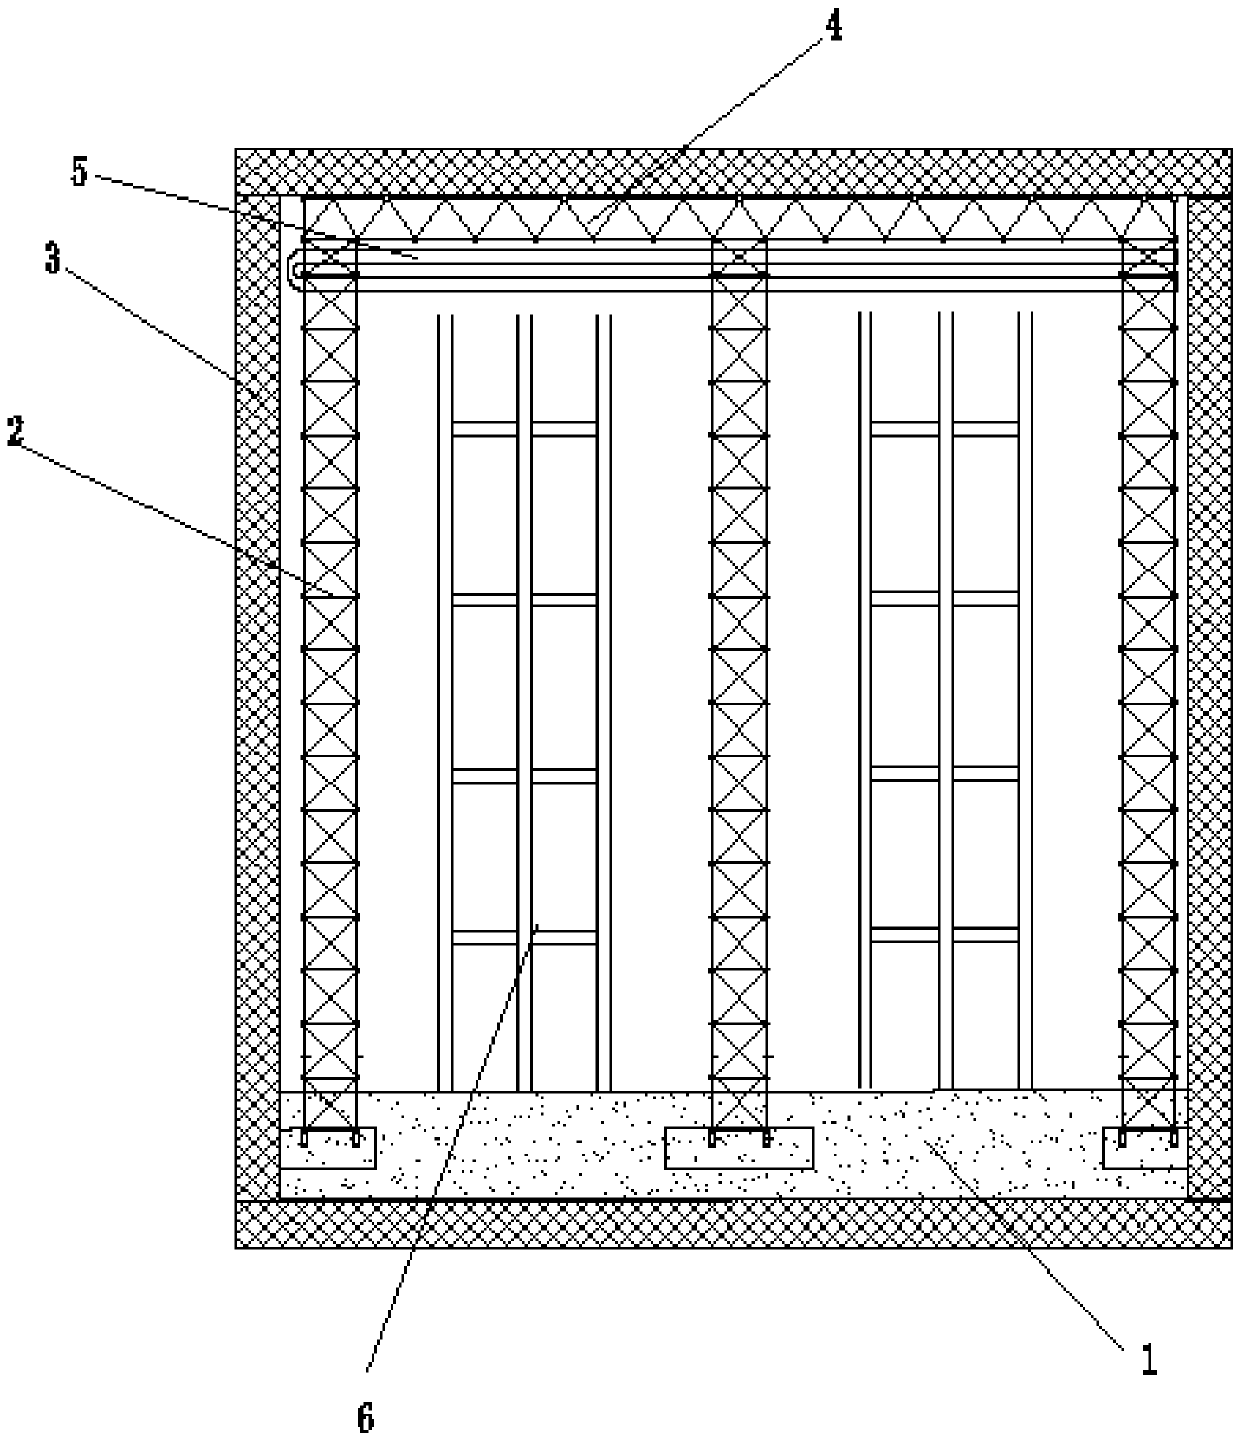 Elevated stereoscopic cold storage based on grid structure